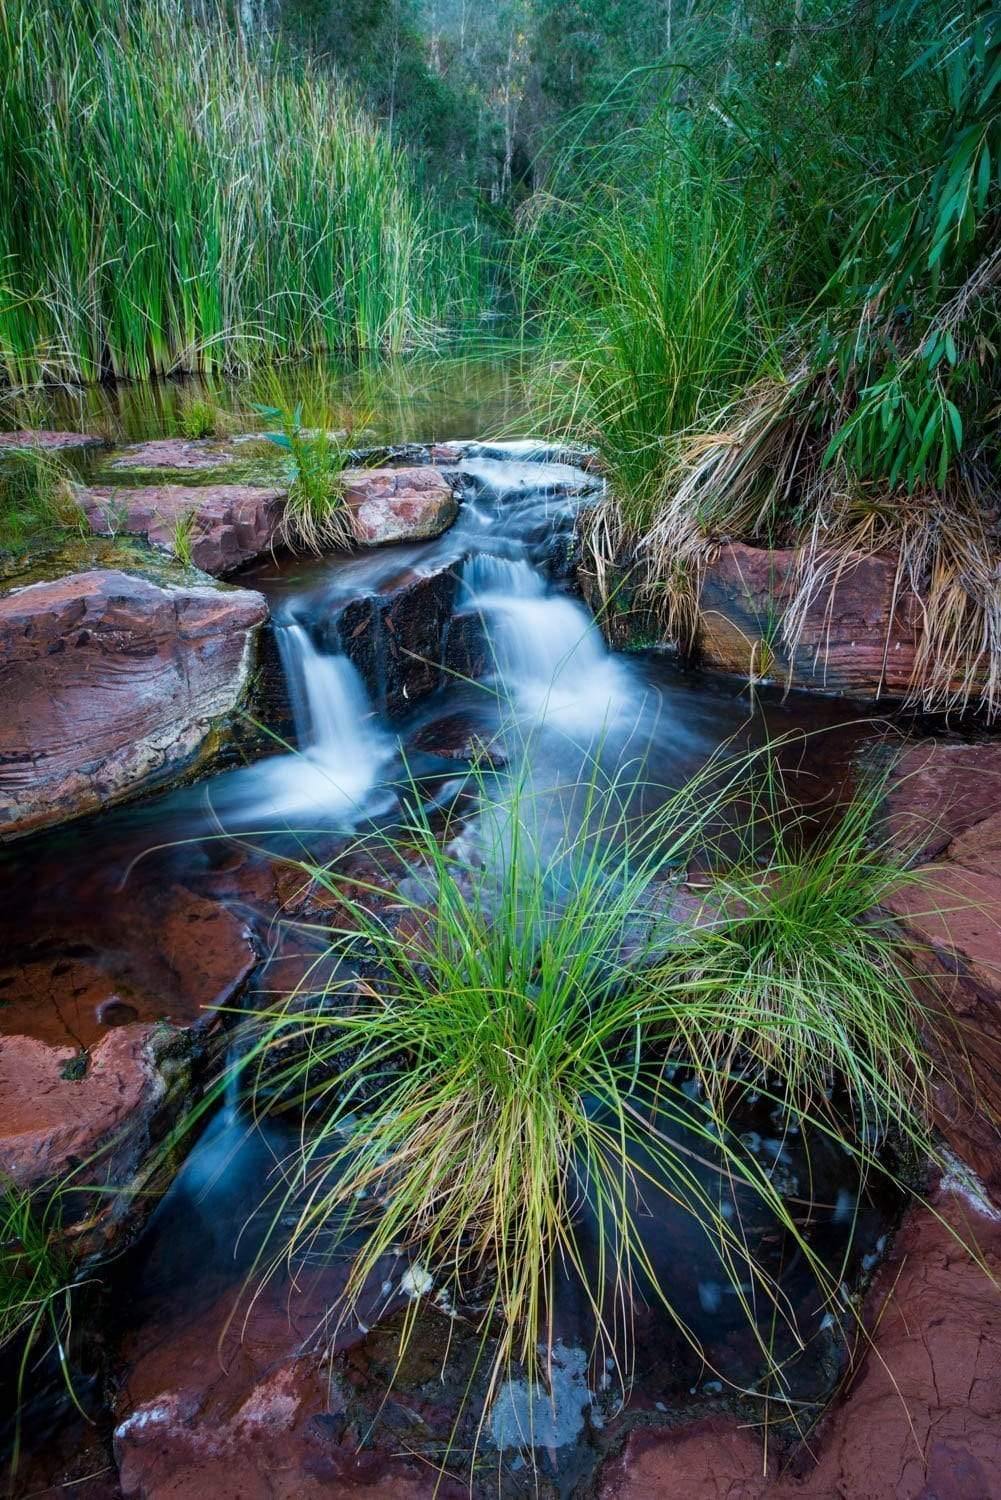 A sequence of large mountain rocks on the land with a steady flow of clean water over them, long bushes and grass in the scene, Dales Gorge Creek - Karijini, The Pilbara